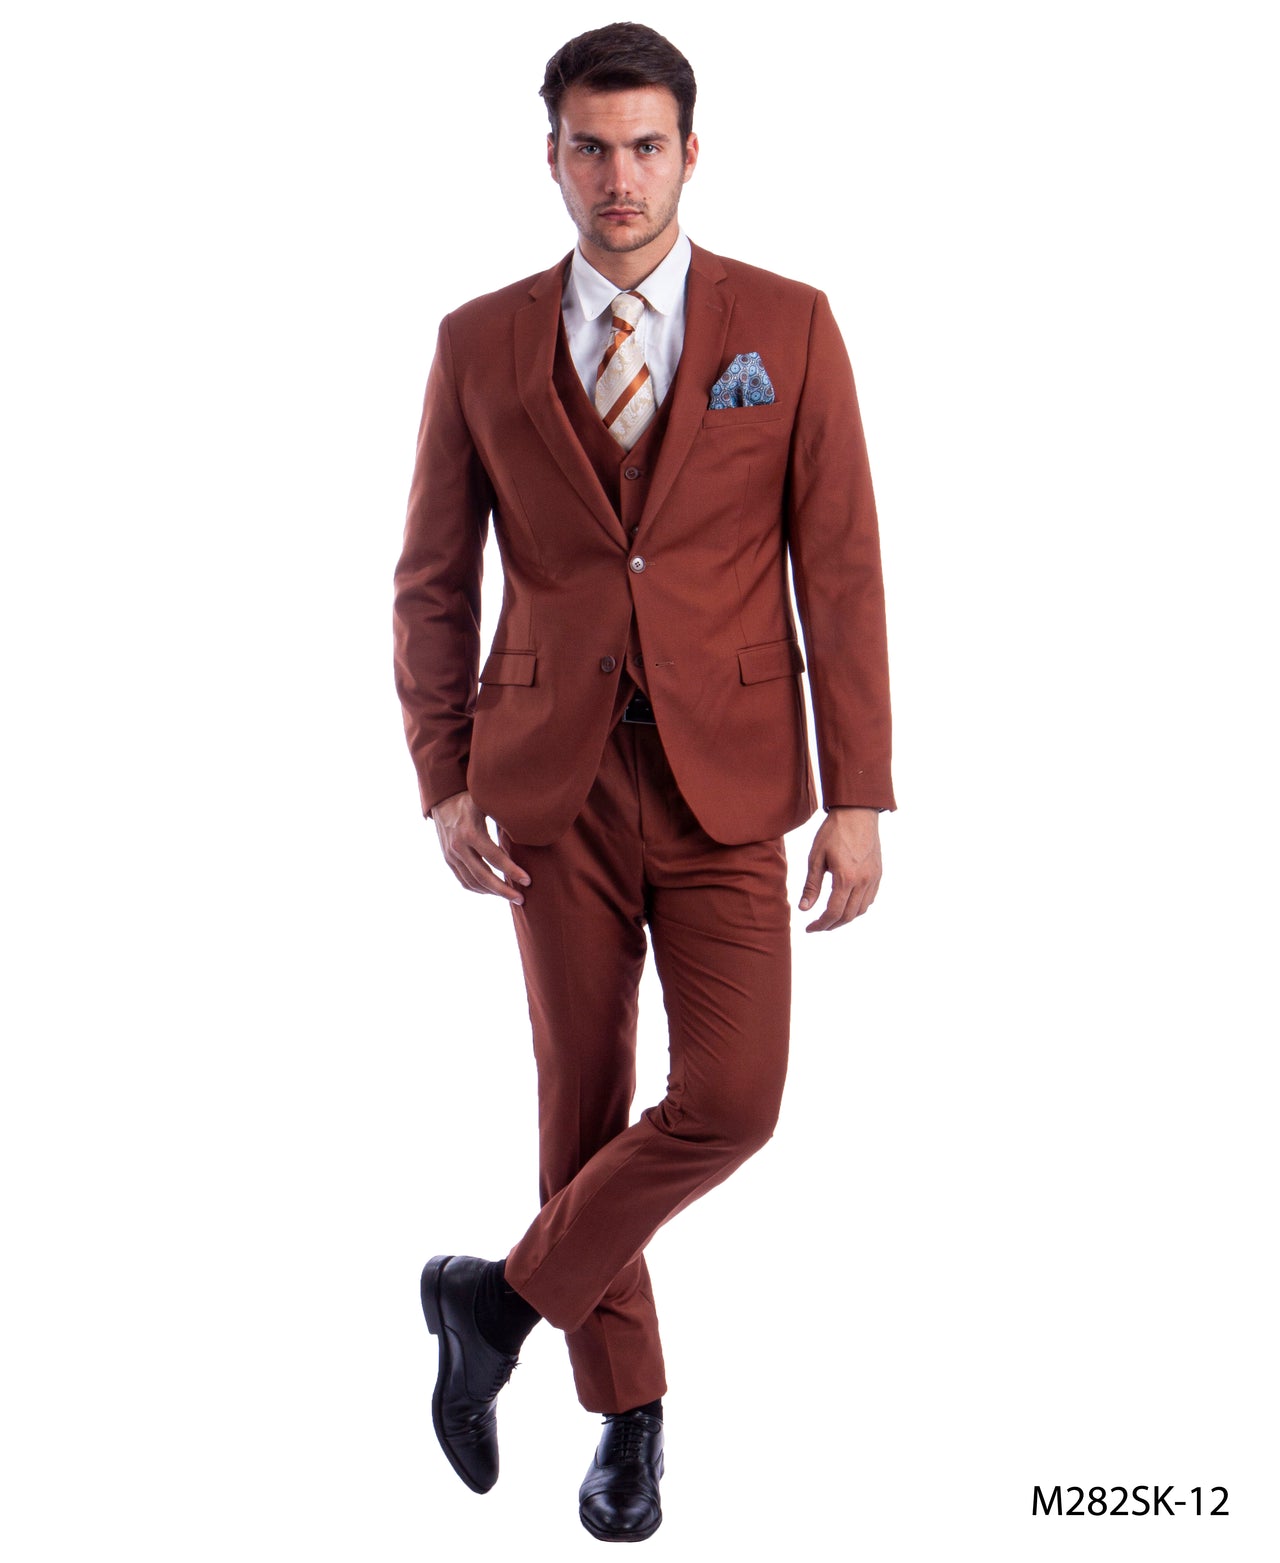 Light Brown Suit For Men Formal Suits For All Ocassions - Hattitude